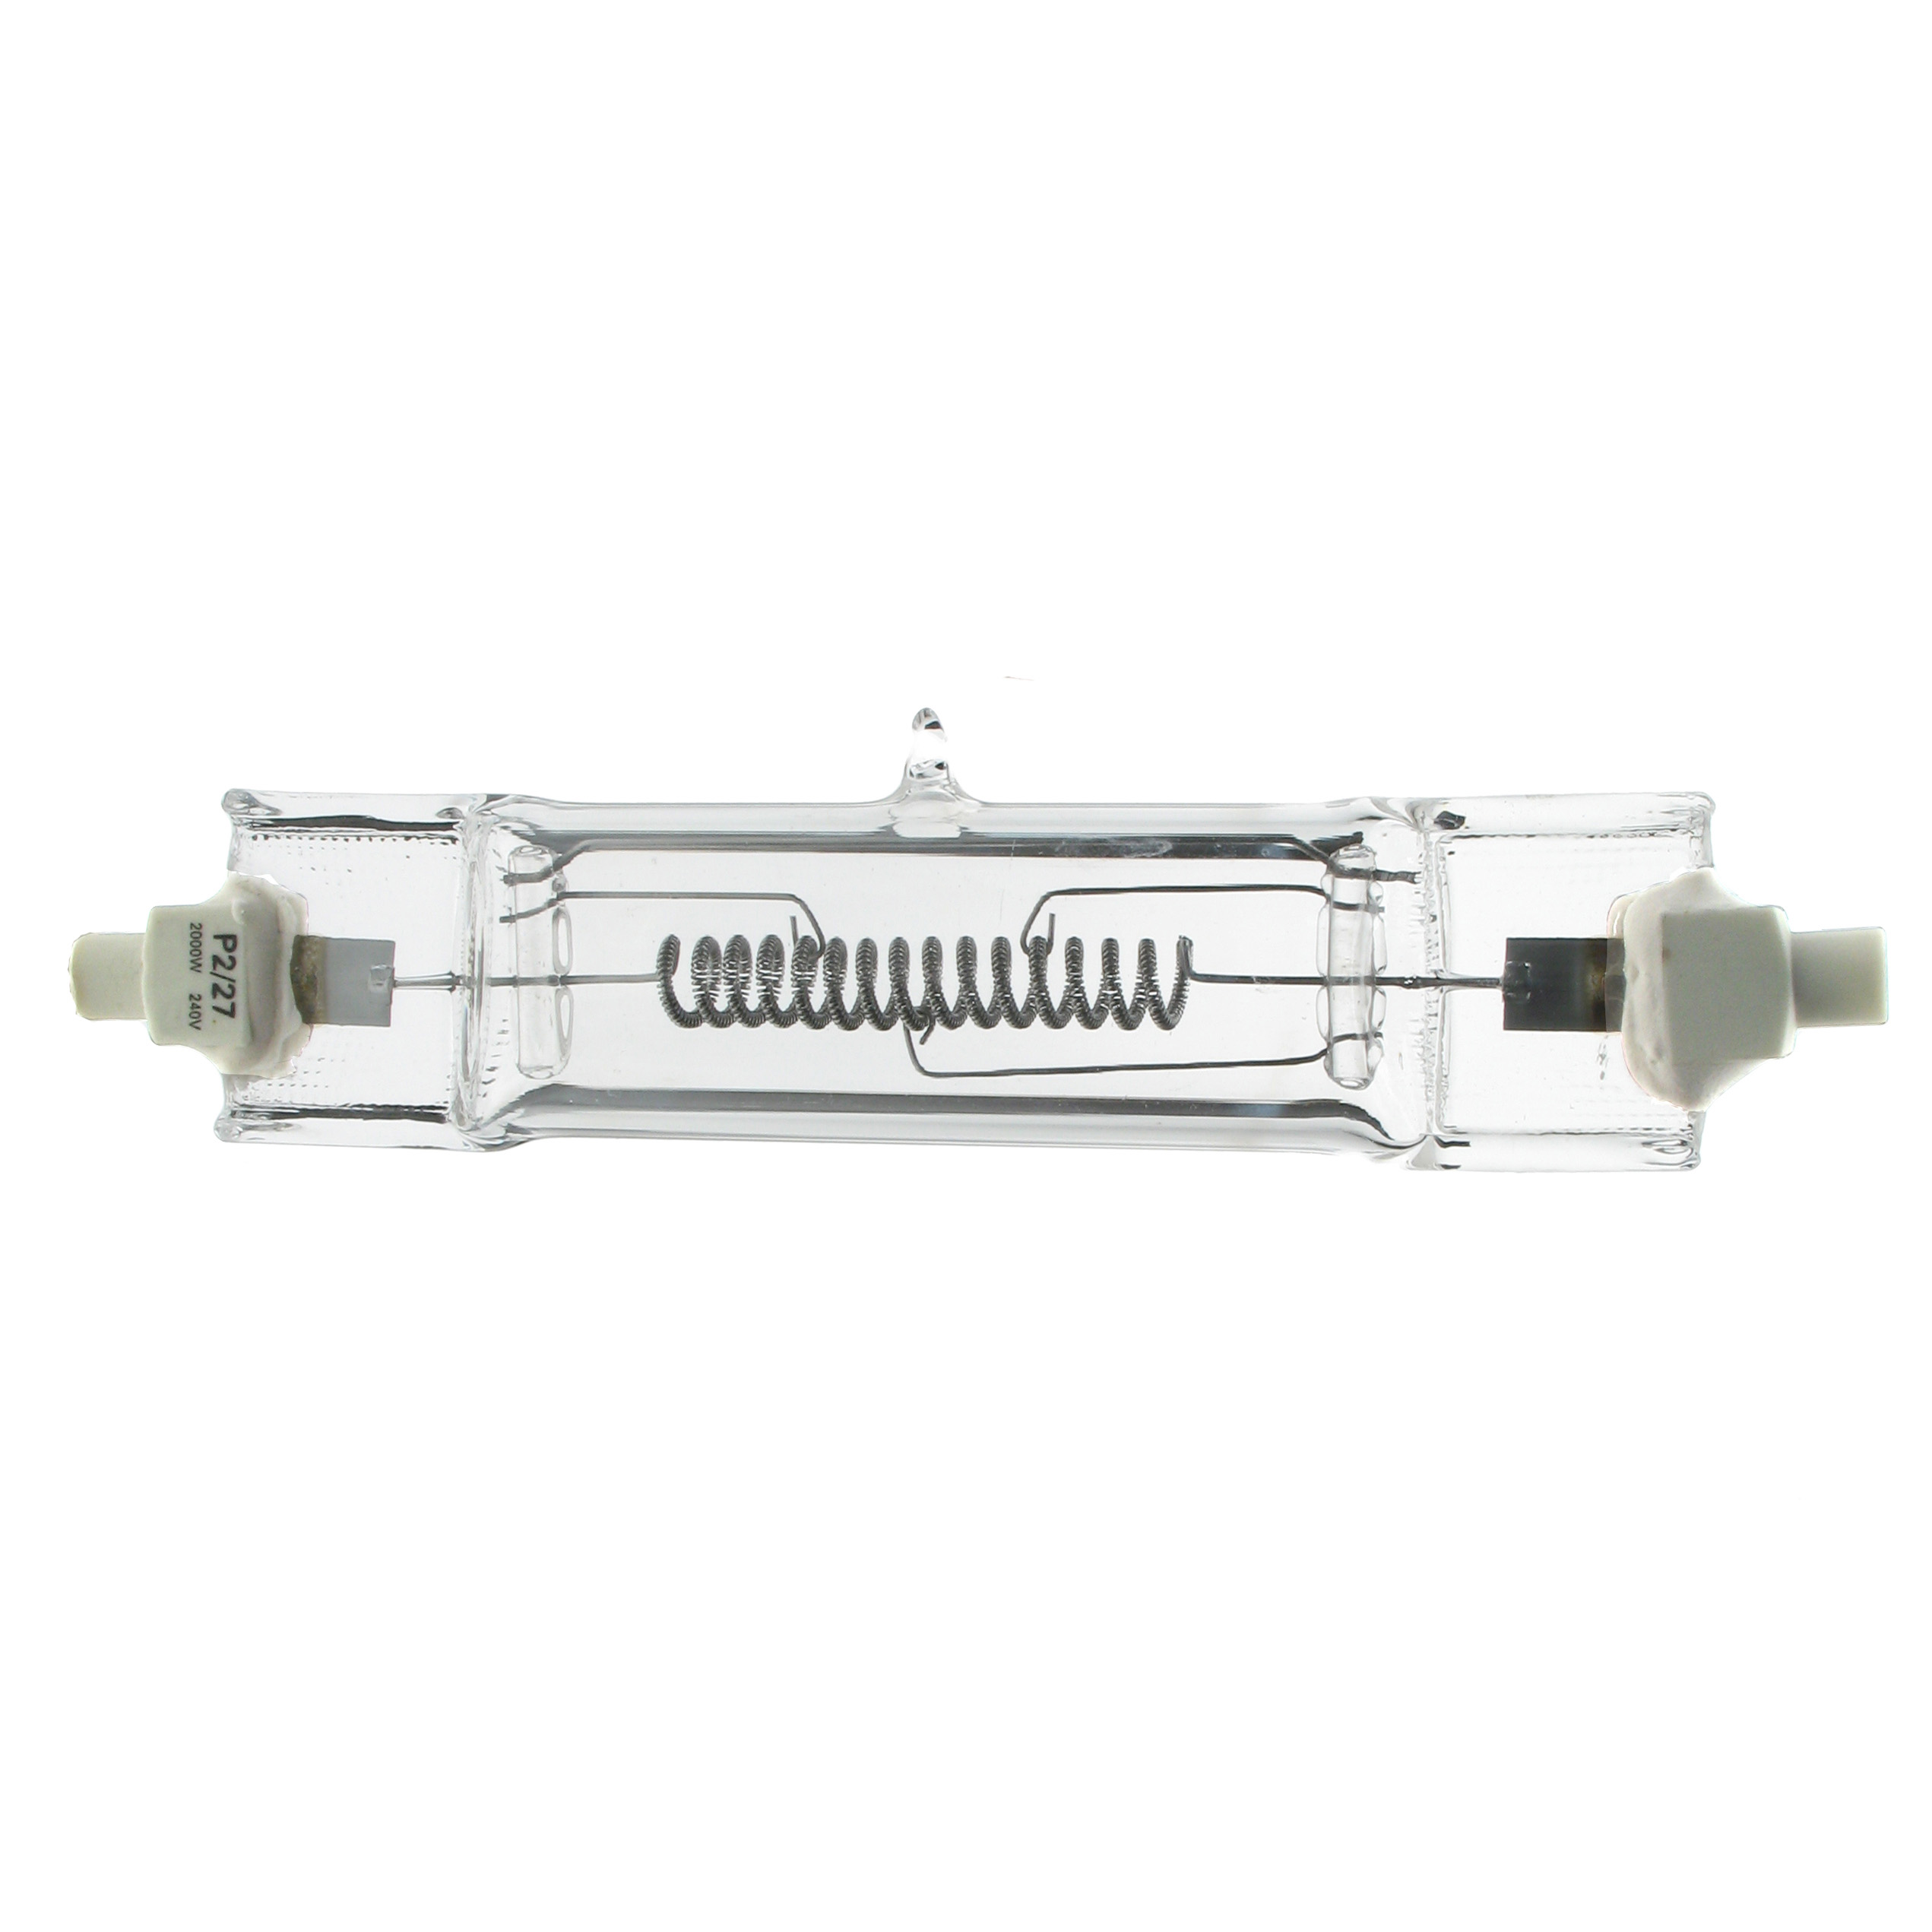 FEX P2/27 2000w Blonde Bulb 240v RX7s Photoluxe P2 27 2KW